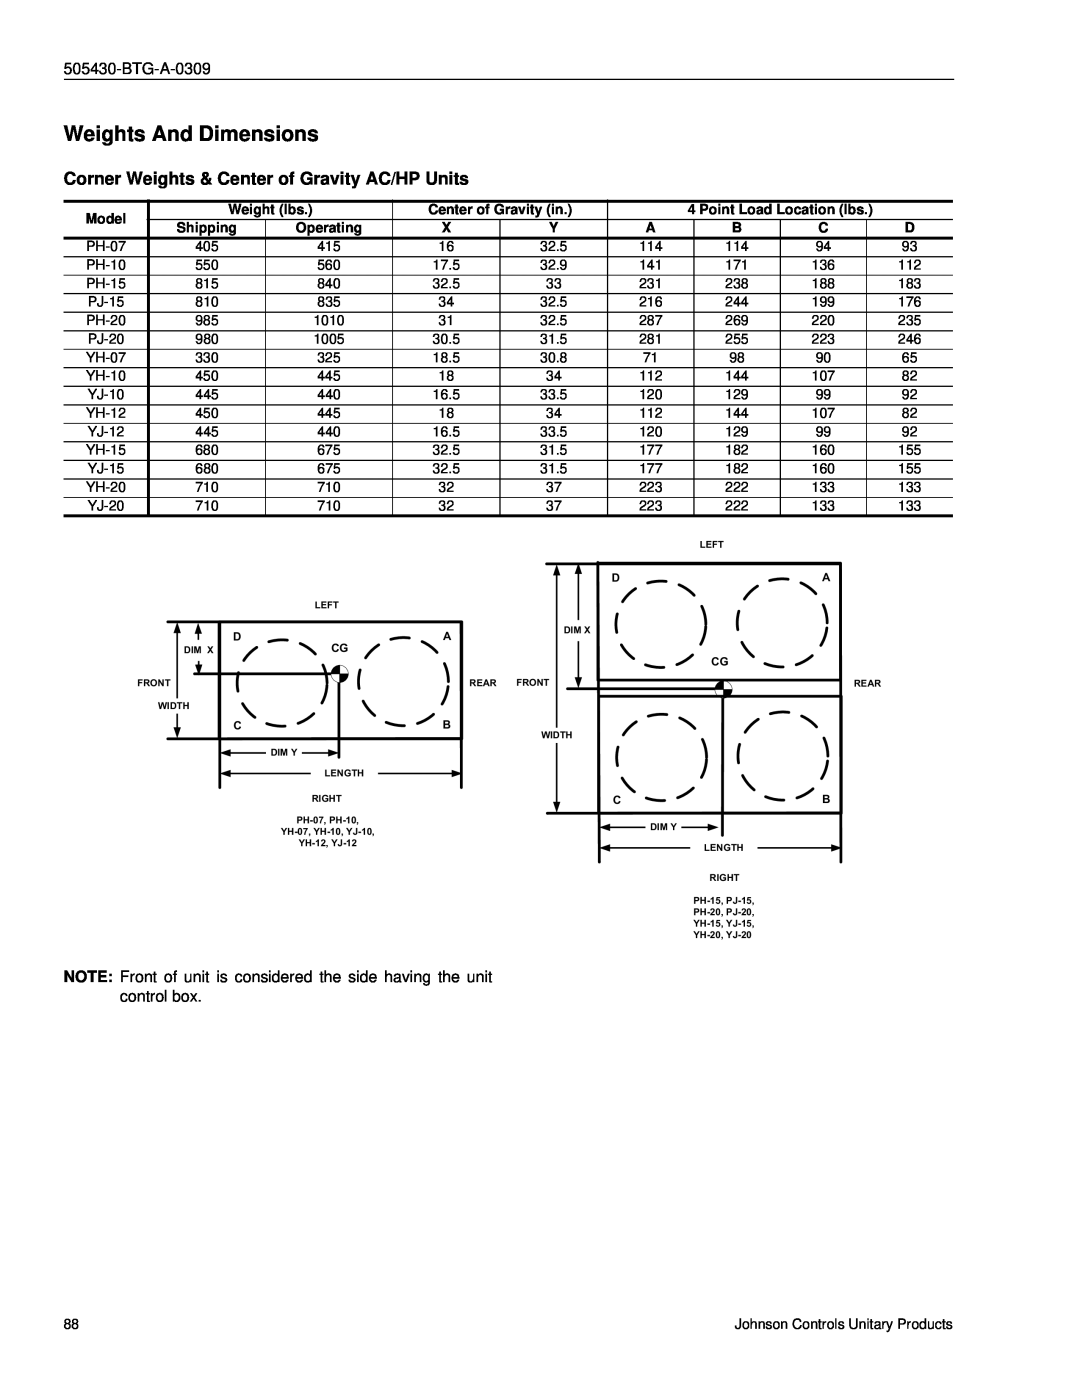 Johnson Controls R-410A manual Weights And Dimensions, Corner Weights & Center of Gravity AC/HP Units 